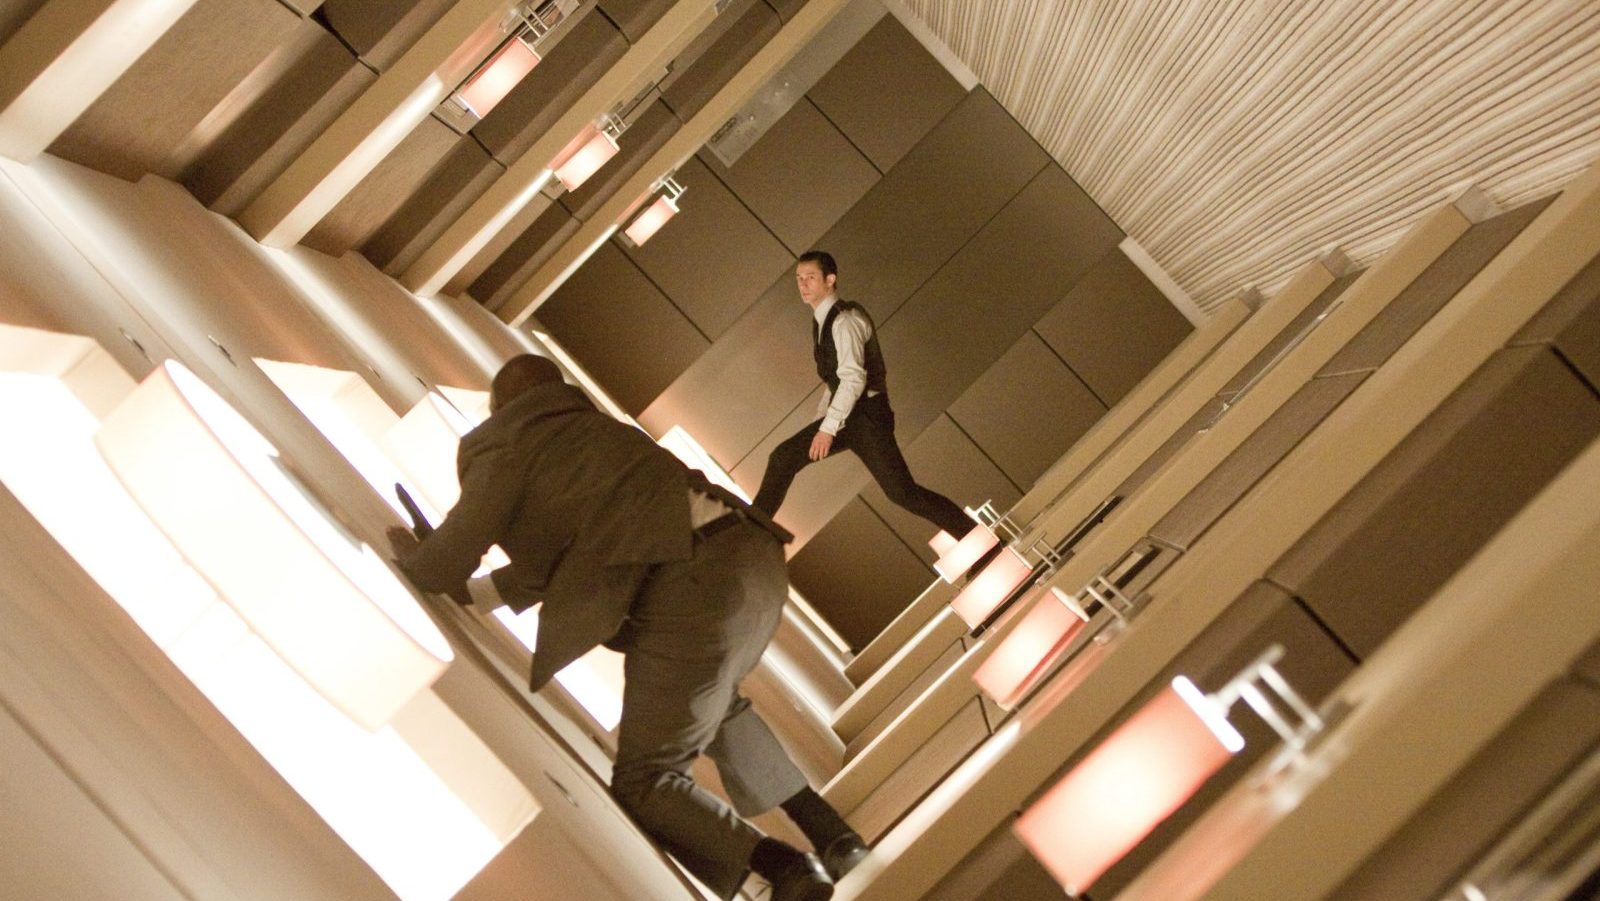 <p><span><em>Inception</em> is Christopher Nolan’s attempt at making a James Bond homage film. Only Christopher knows if he was successful in the endeavor or not. What is clear is that he created one of the best action films of the 2000s.</span></p><p><span>This sci-fi action thriller is unlike anything else in the genre. Inception offers viewers an ambitious story, beautifully shot action scenes, and an ending still discussed over a decade later.</span></p>